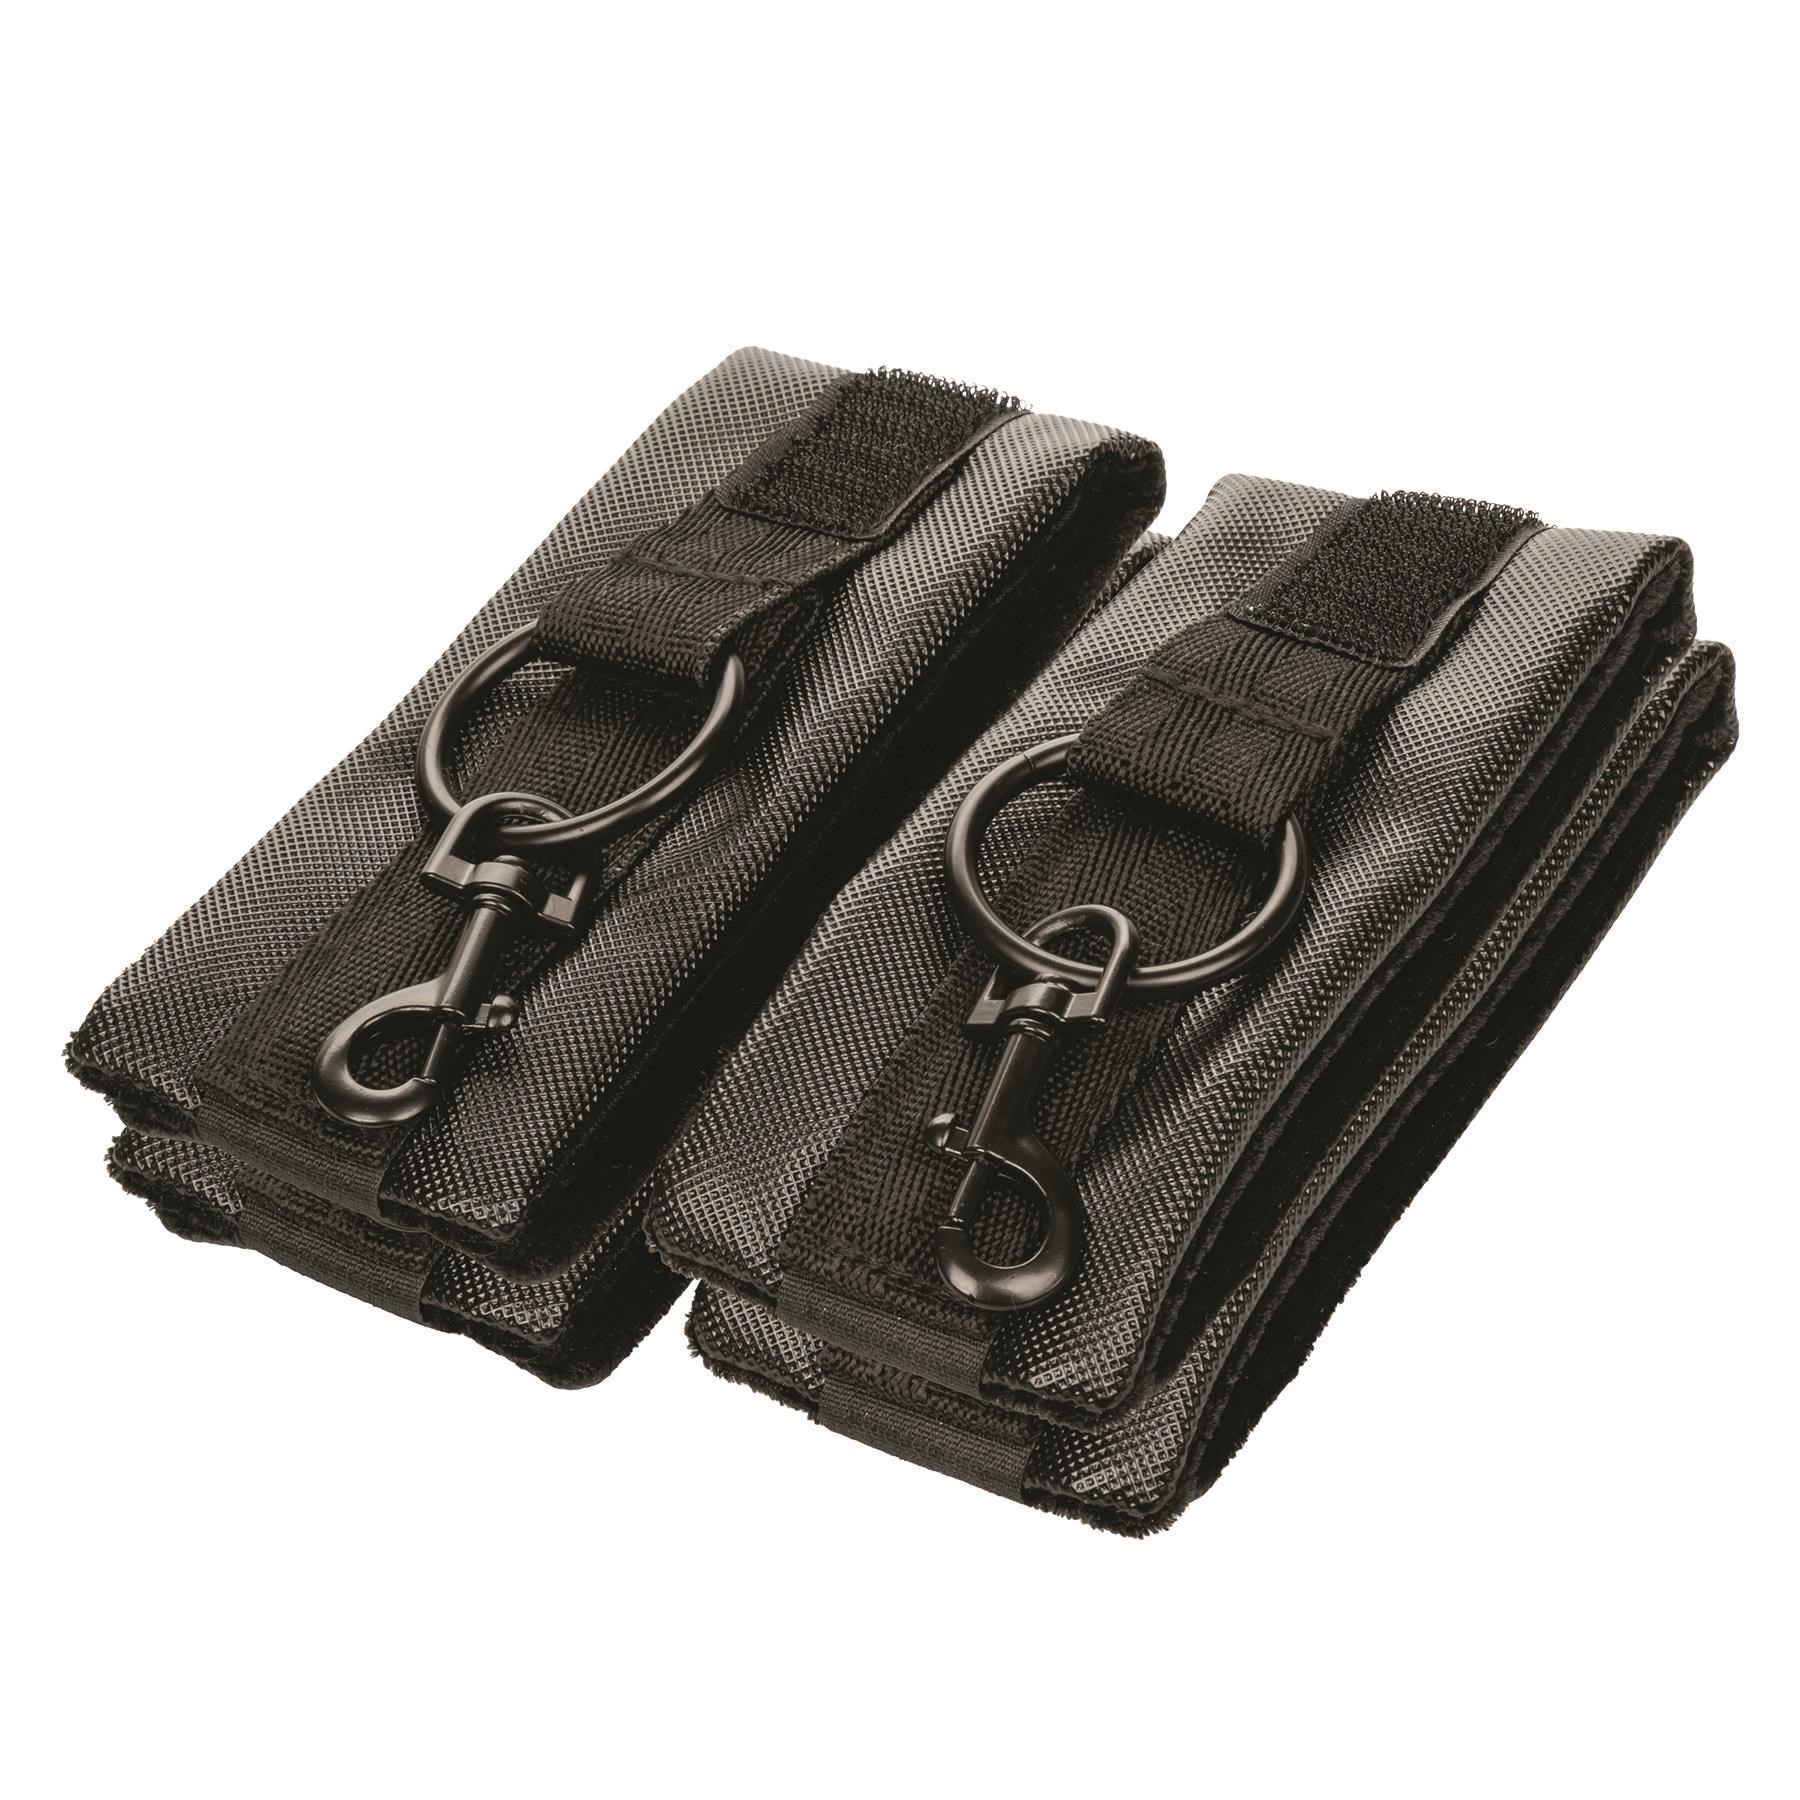 Boundless Bed Restraint System Cuffs